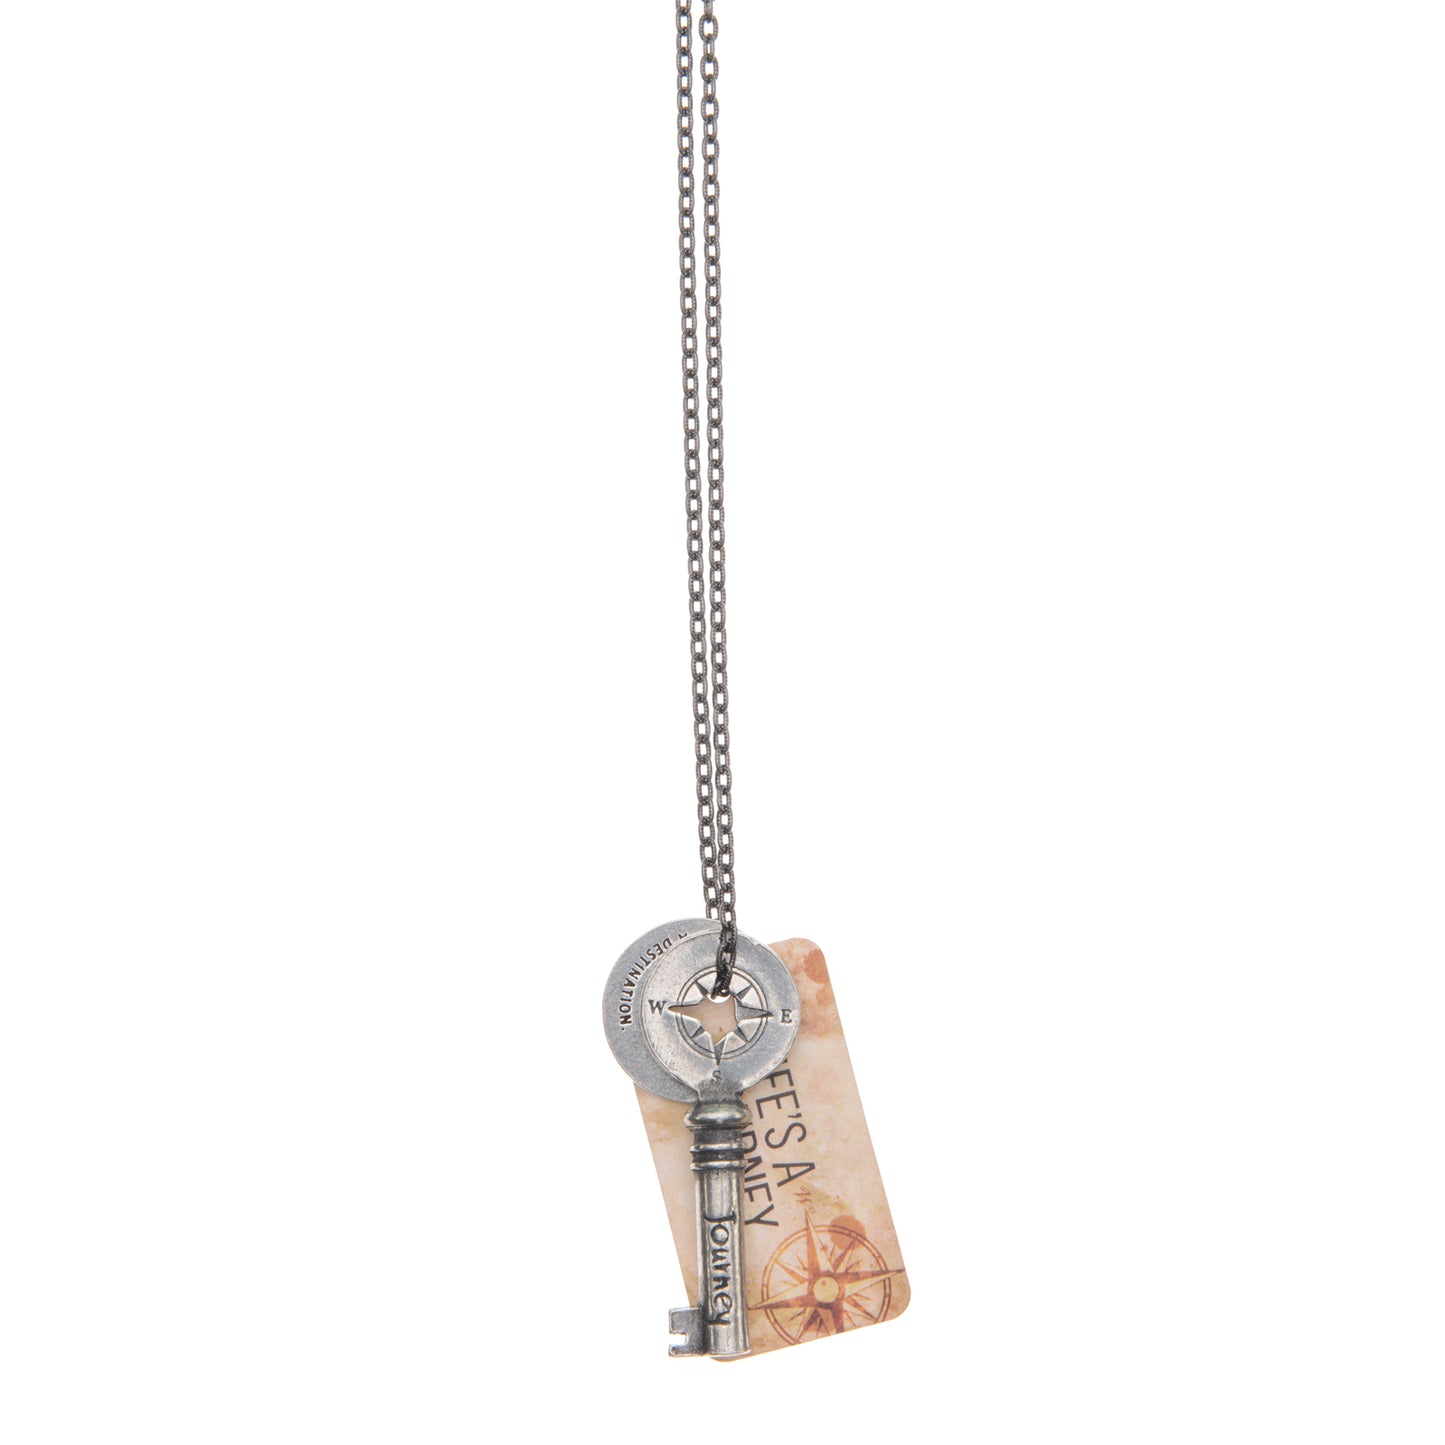 Dangling Journey Key Charm on ball chain with backer card